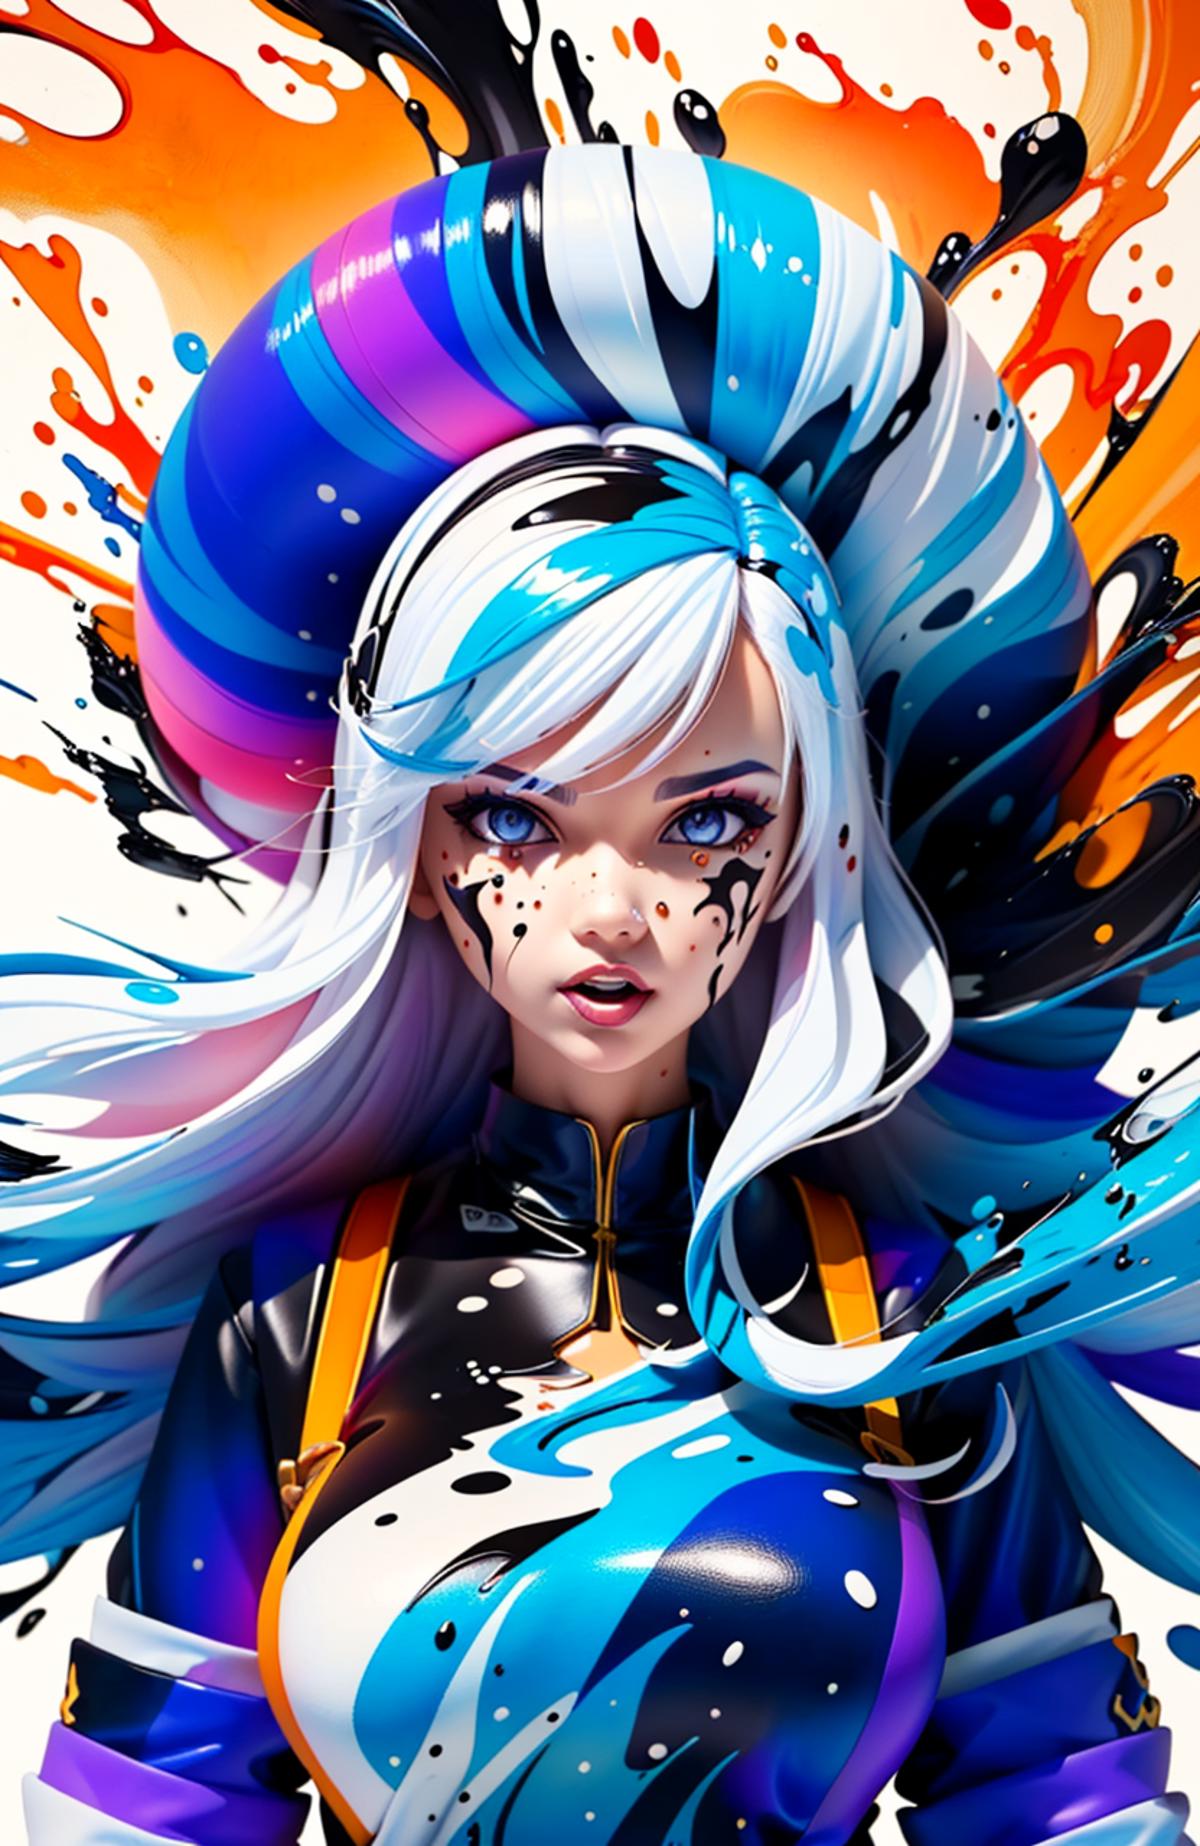 A digital painting of a woman with blue eyes, painted white hair and black and yellow clothing against a colorful background.